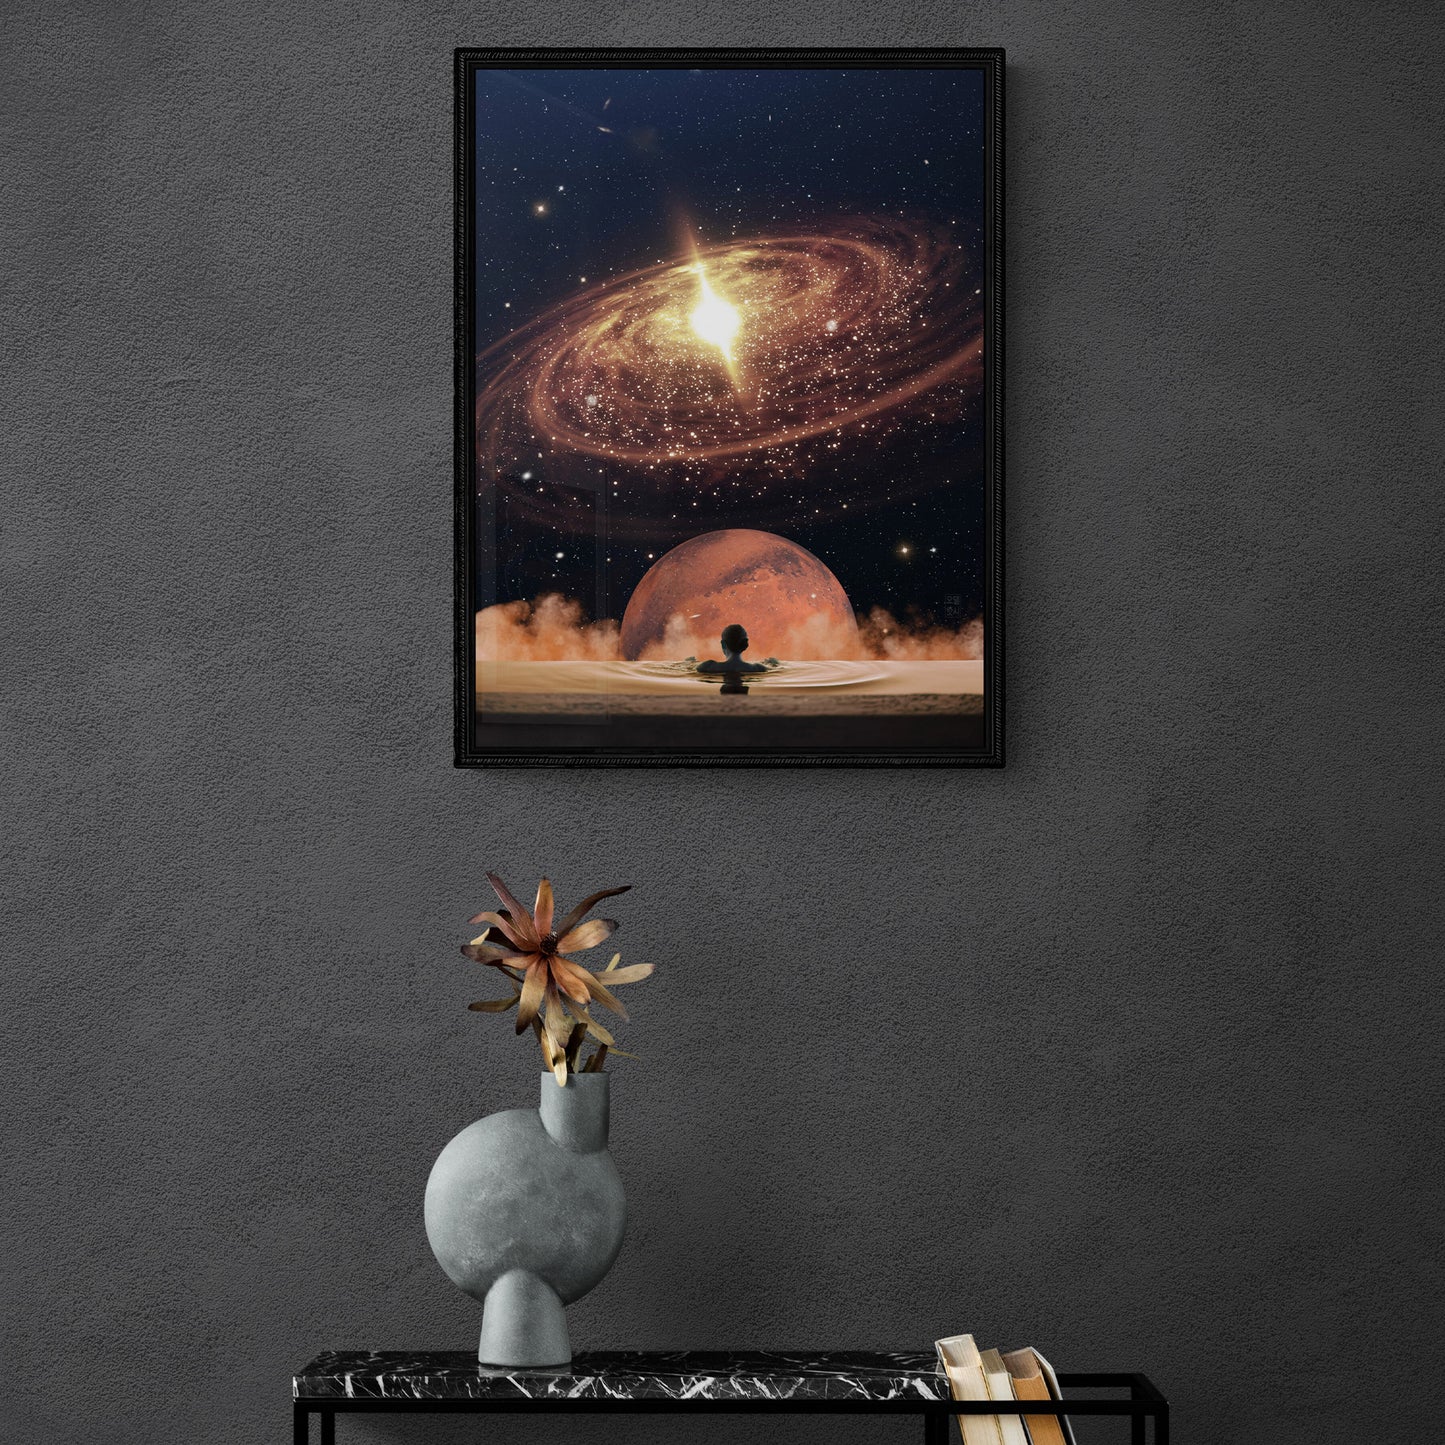 Mars Bath 18X24 Inch Poster Print for Sci-Fi, Space, & Surreal Art Fans